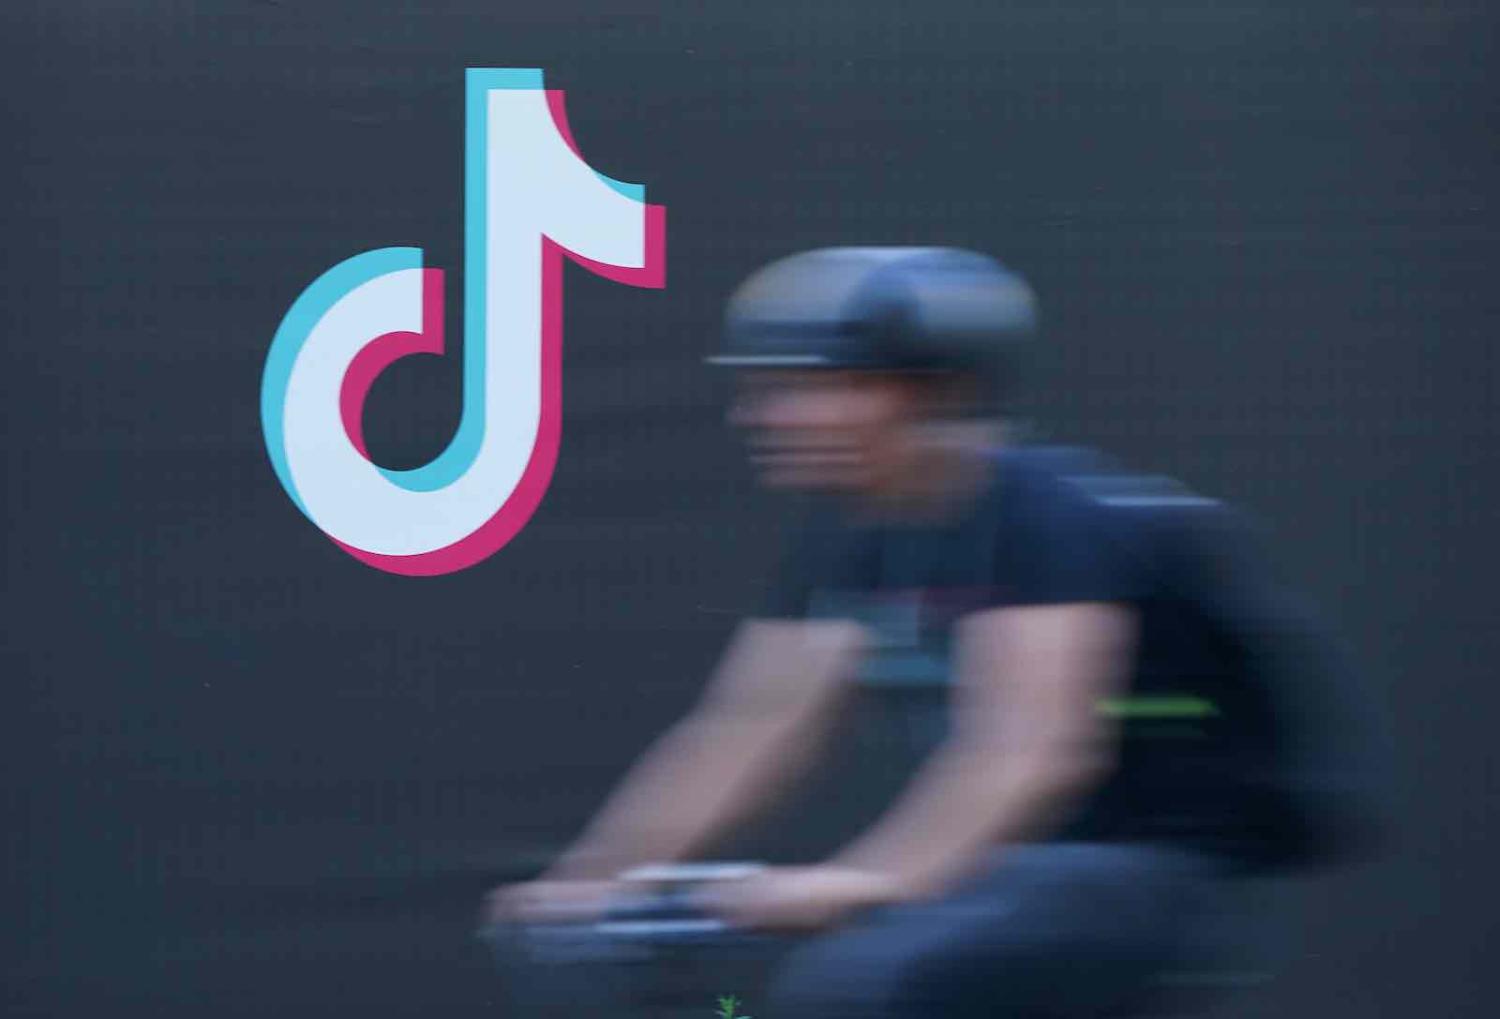 TikTok’s speedy rise into the West’s cultural mainstream reflects the power of its specialised recommendation system (Sean Gallup/Getty Images)